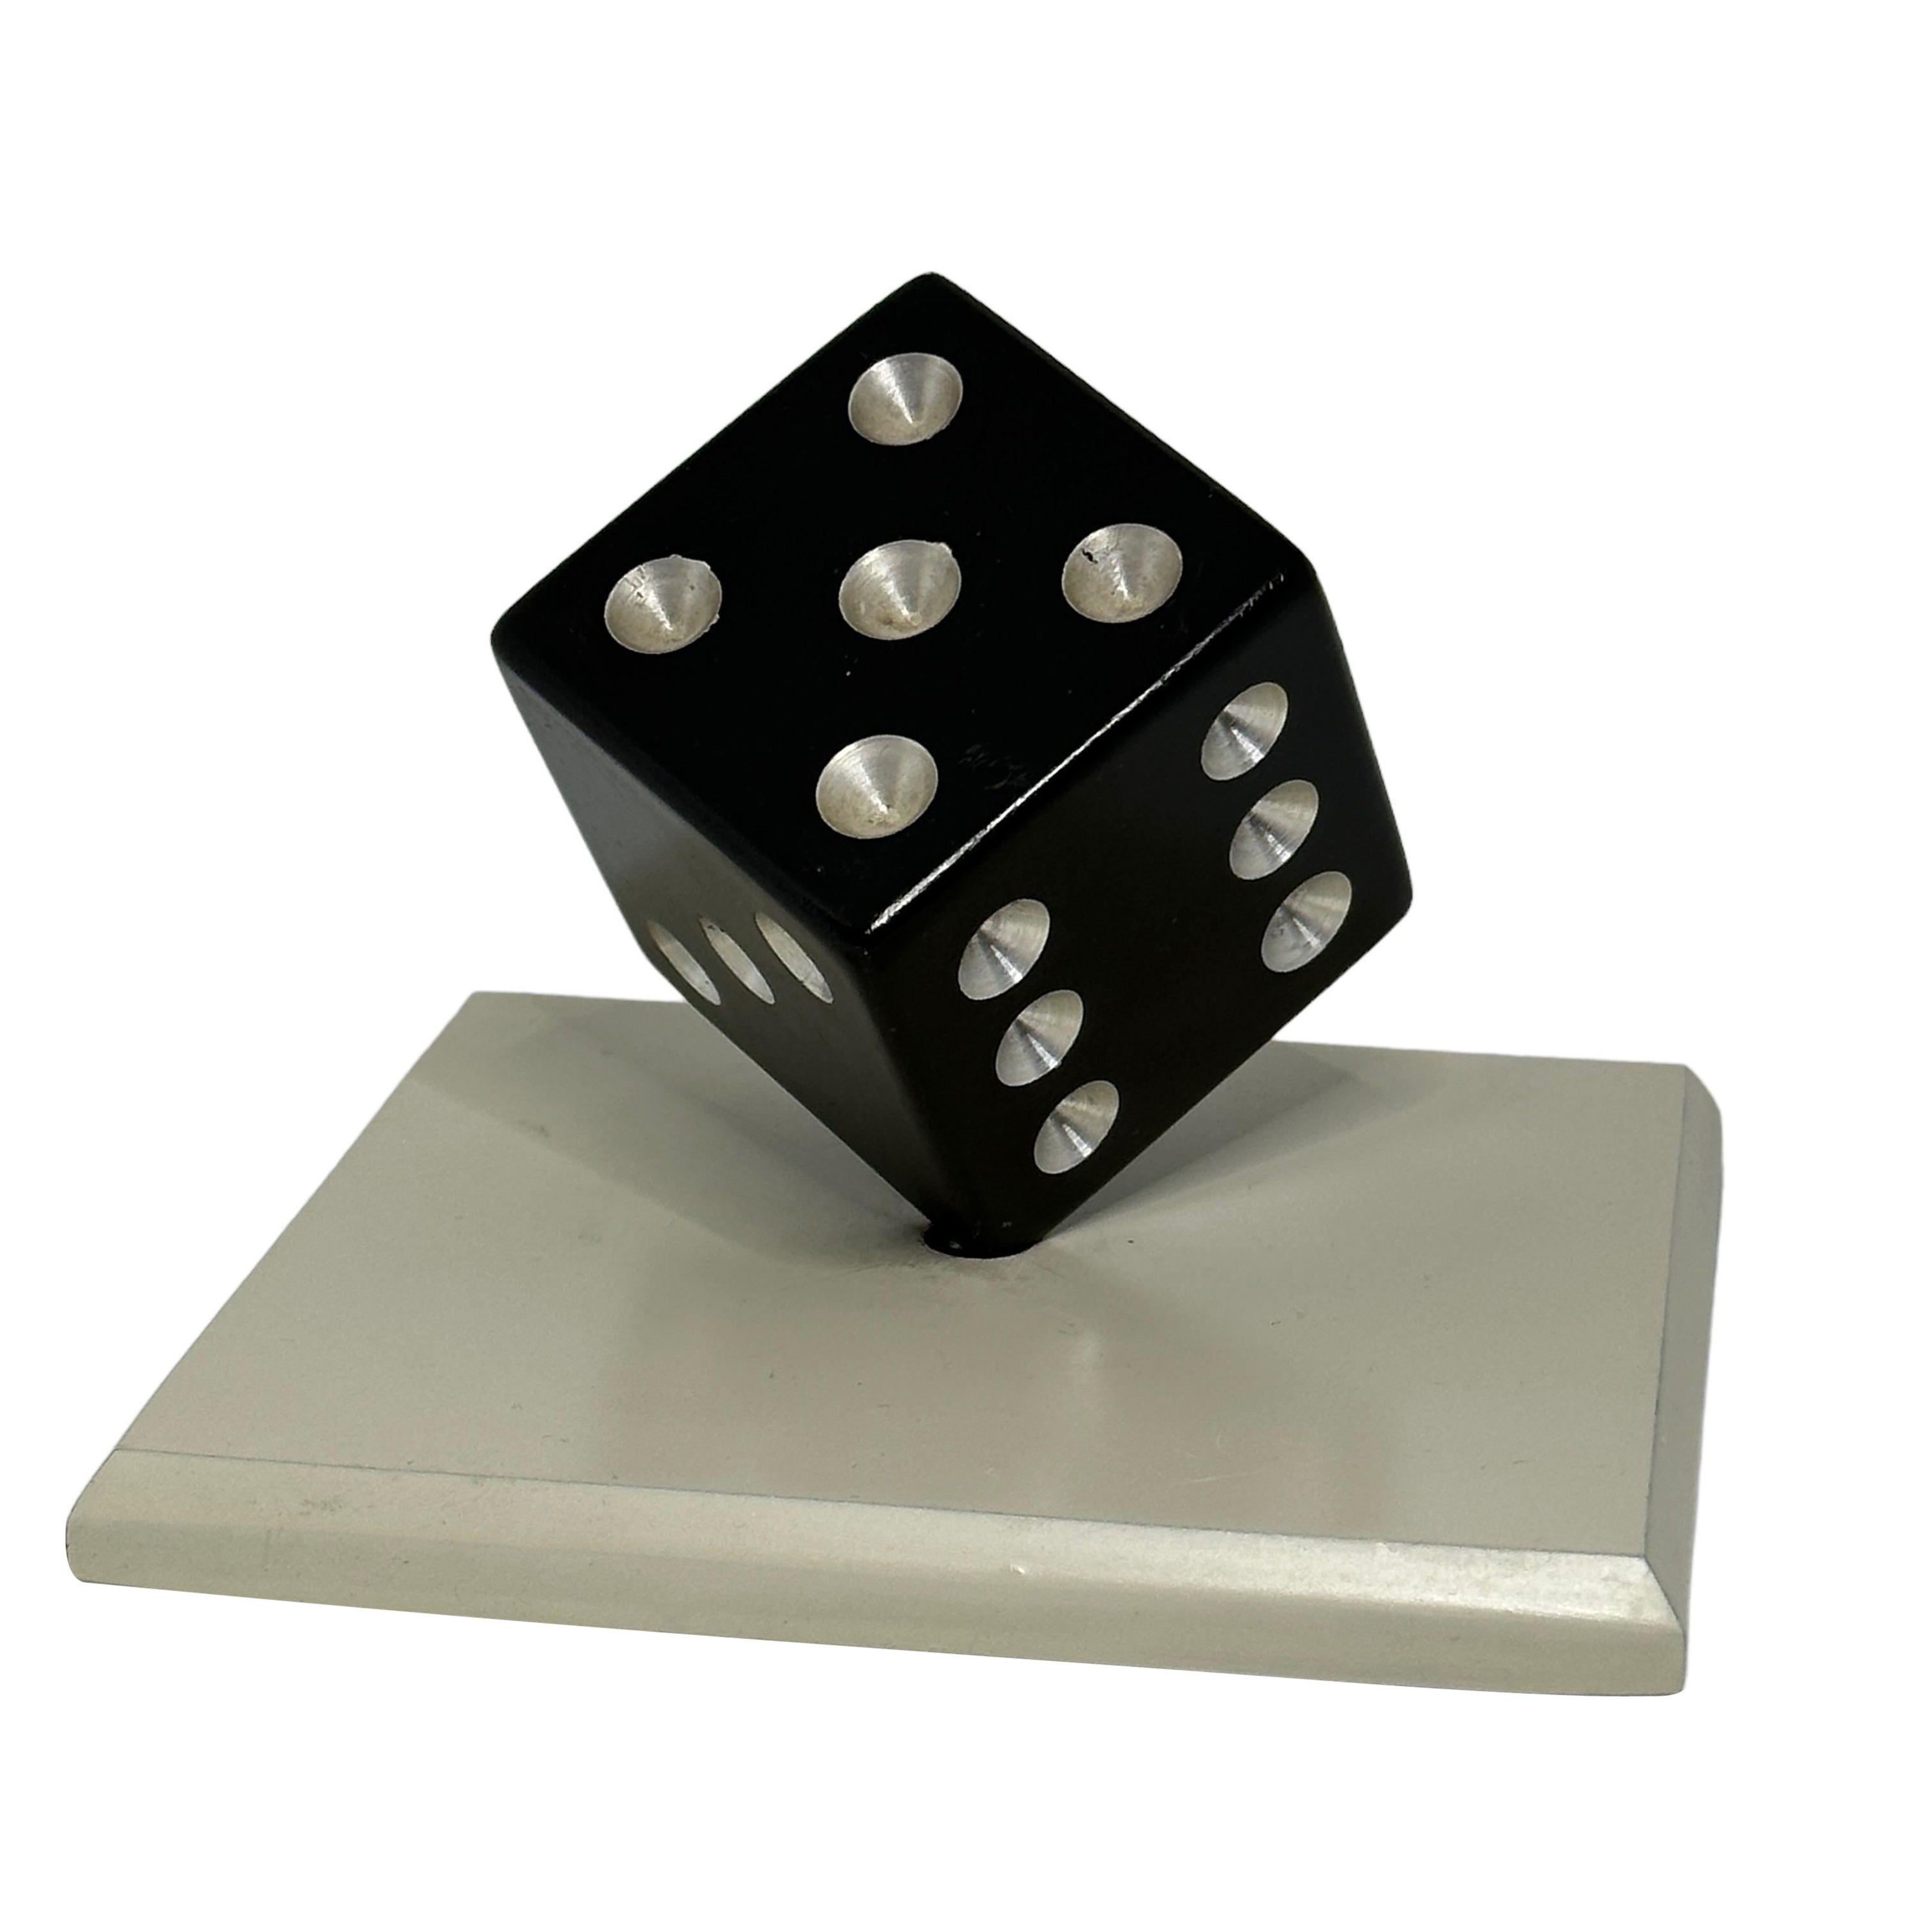 Dice Aluminum Metal Sculpture or Paper Weight Mid-Century Modern, German, 1970s For Sale